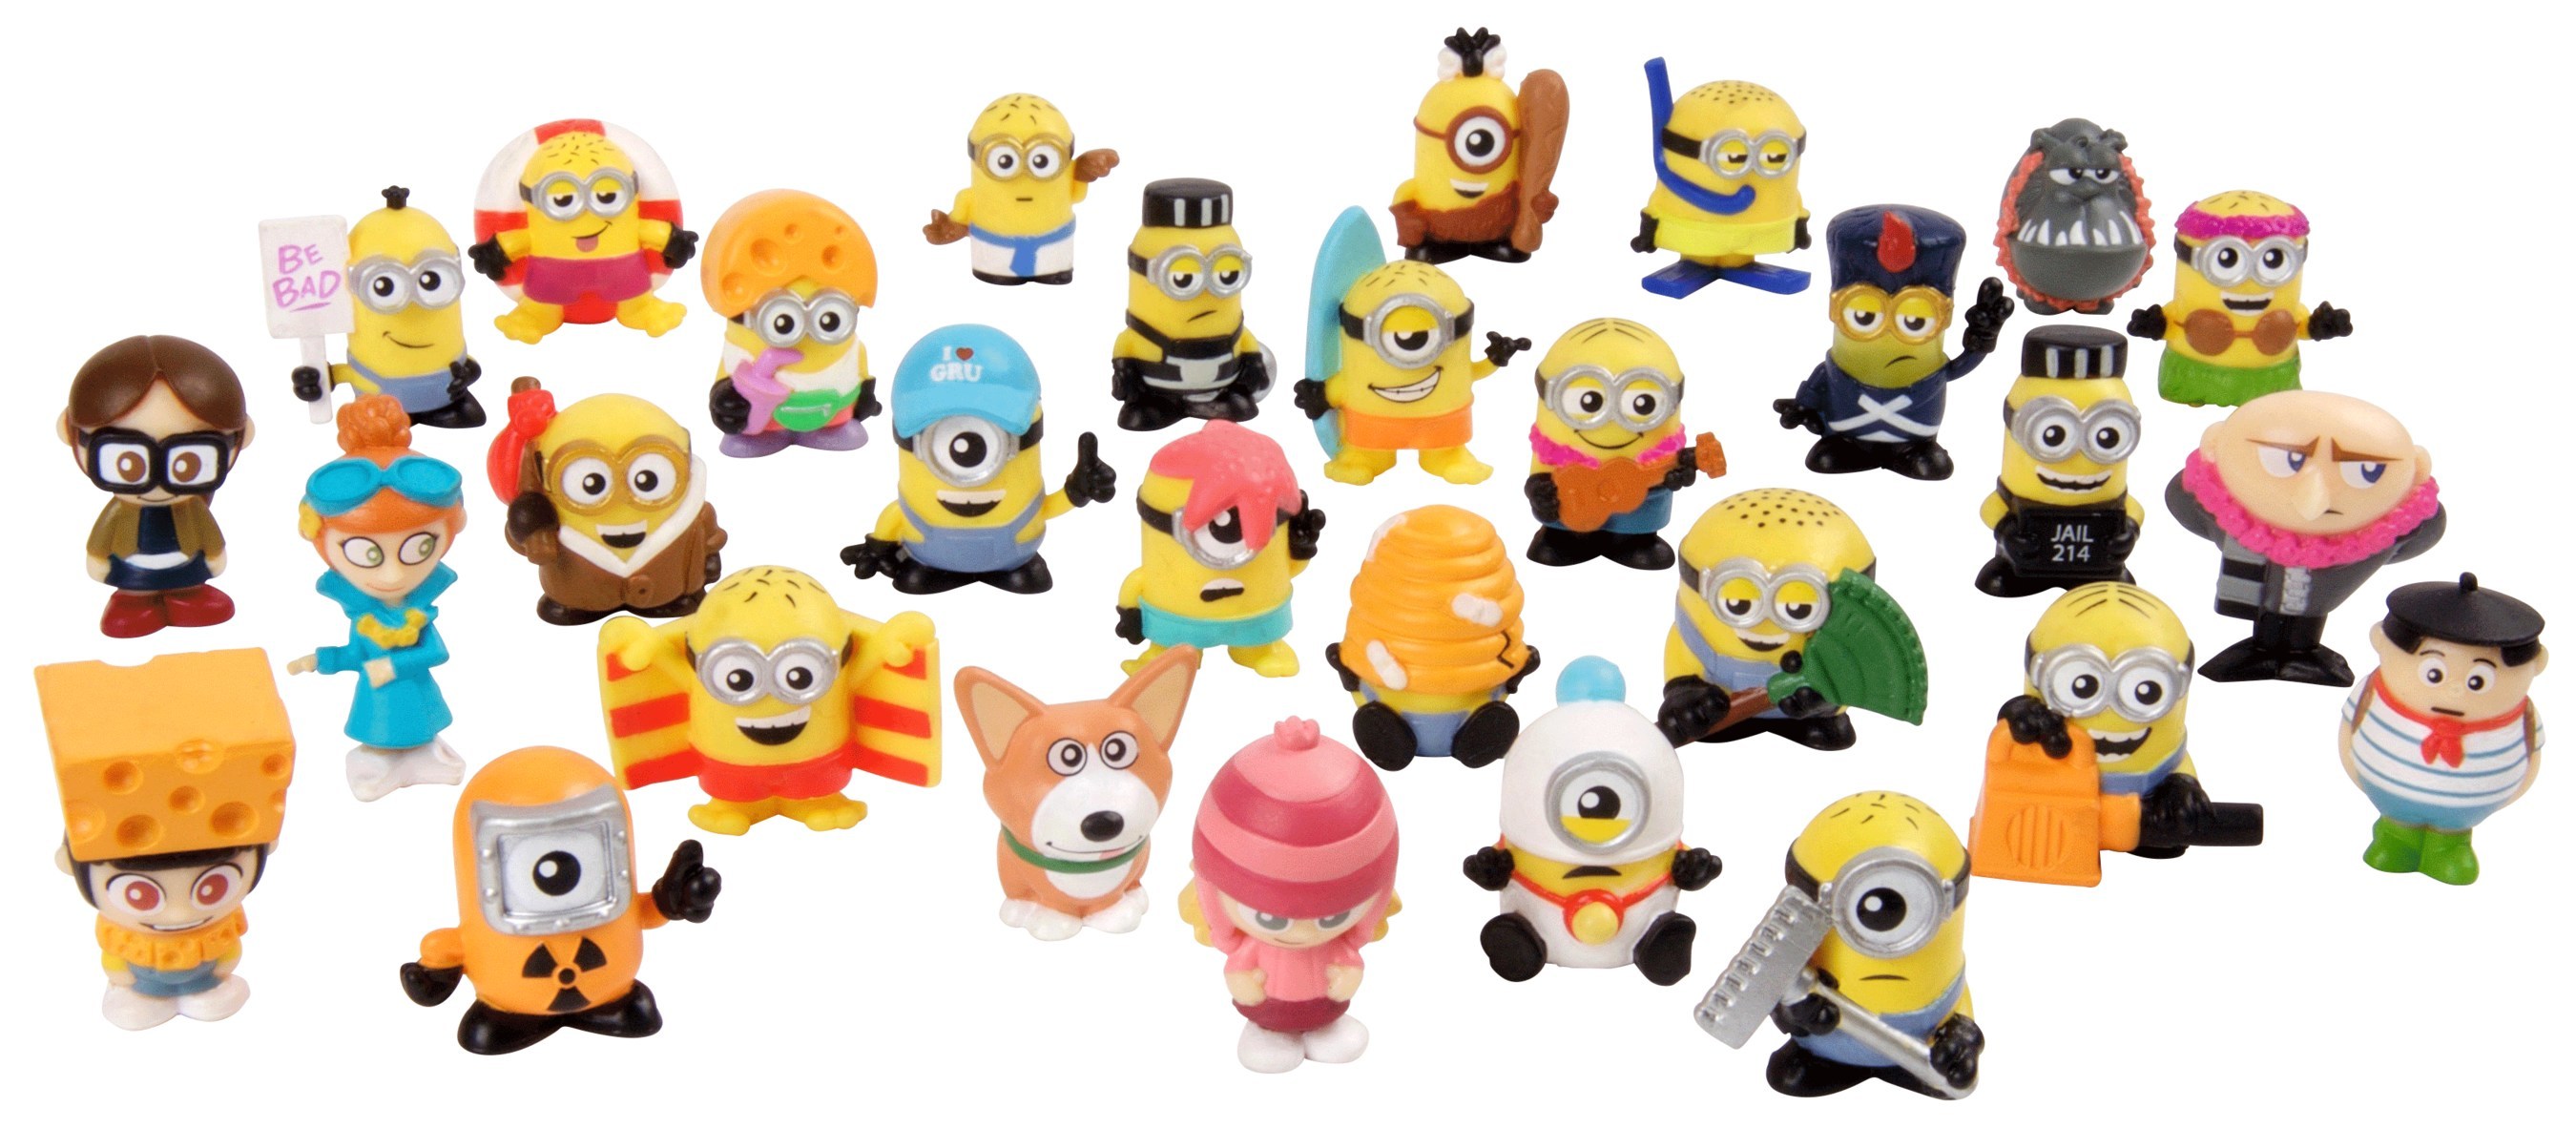 Moose Toys Collaborates With Illumination And Universal Brand Development To Create Mineez An All New Toy Collectible Line Featuring The Largest Selection Of Despicable Me Characters